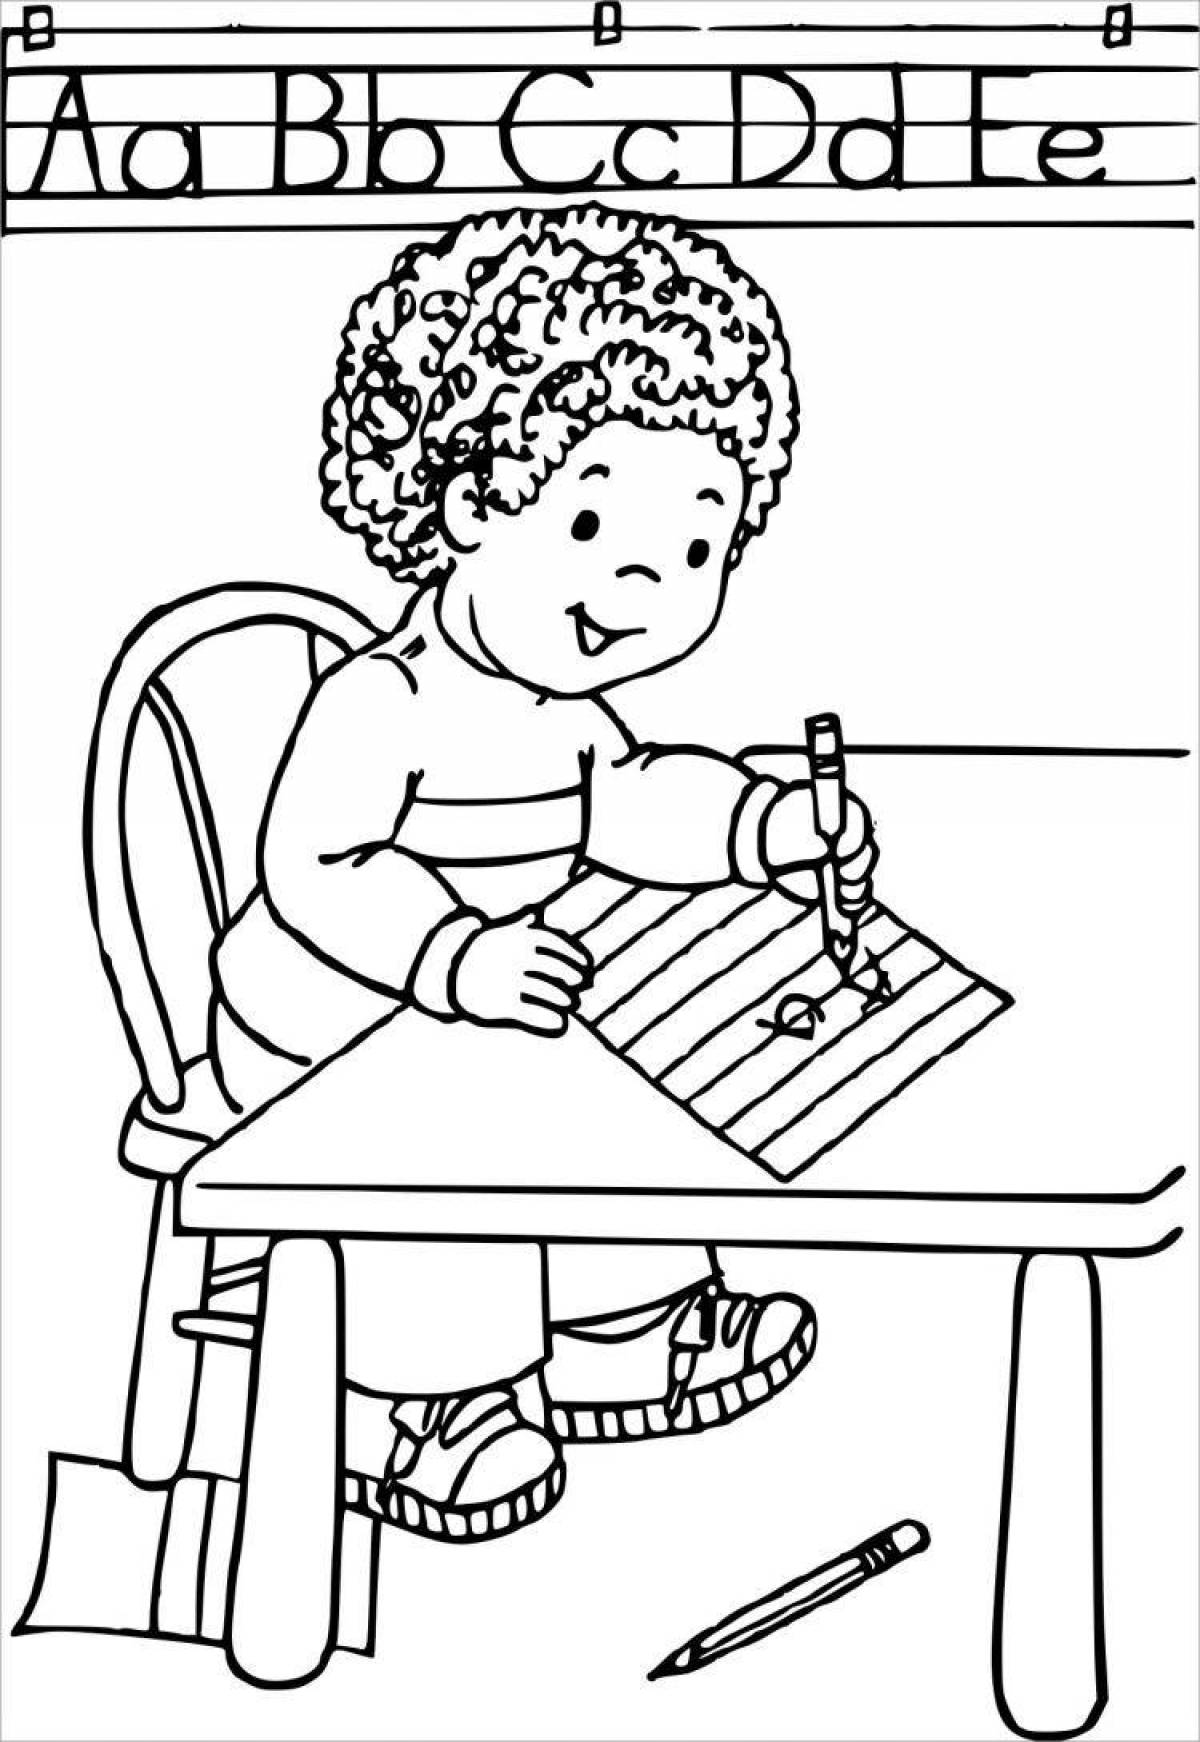 Student coloring book for kids